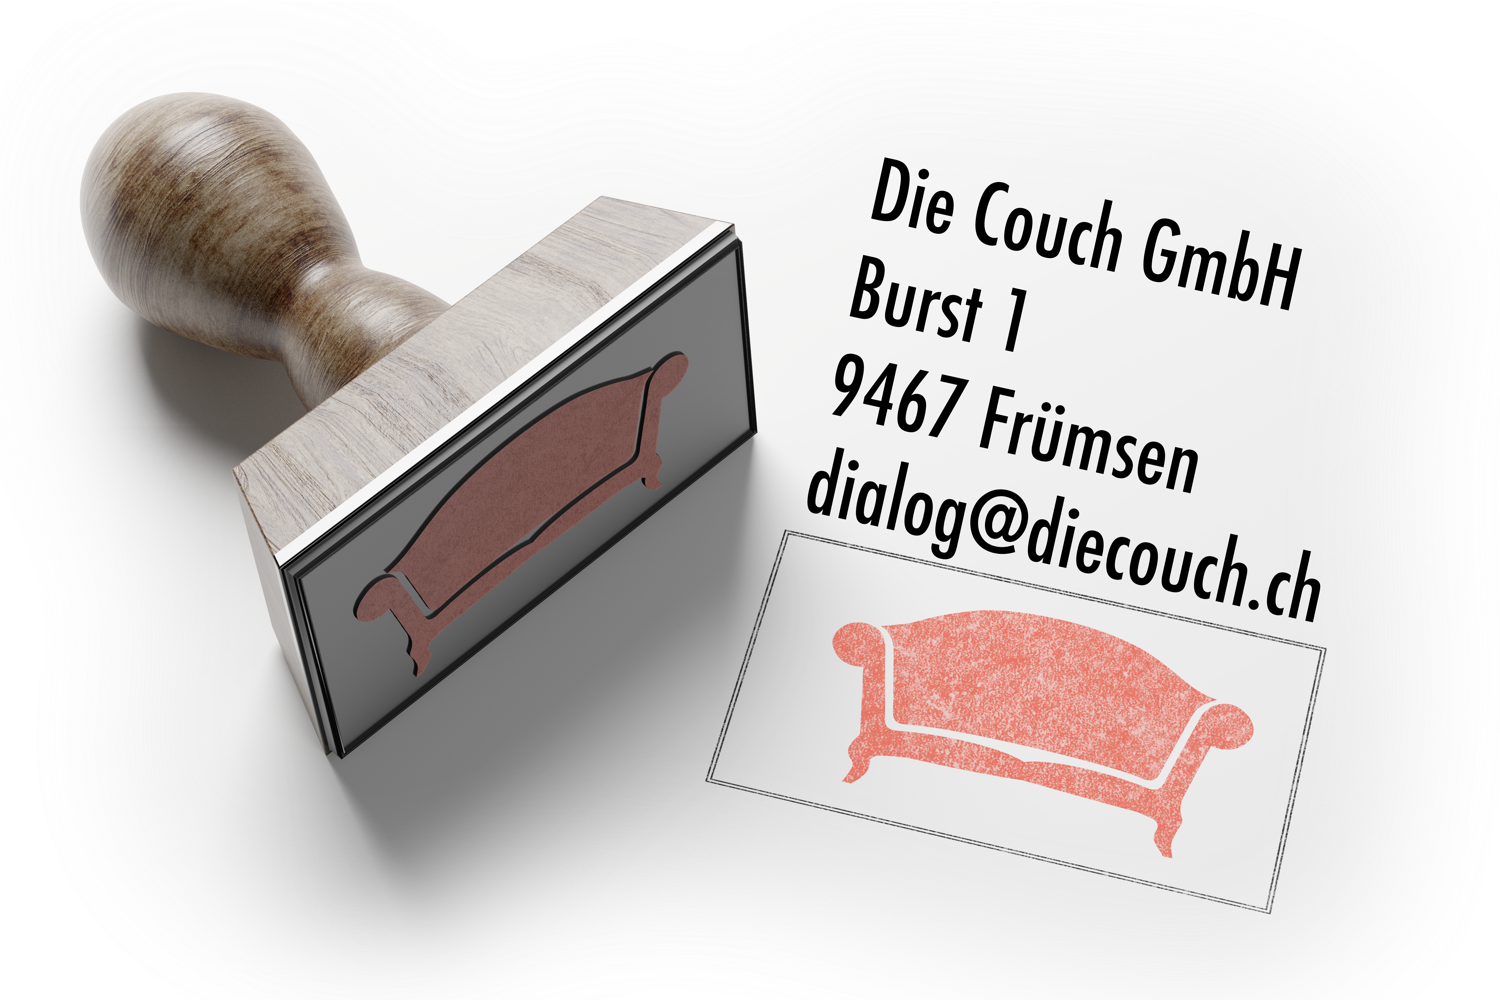 Couch Stempel-Adresse